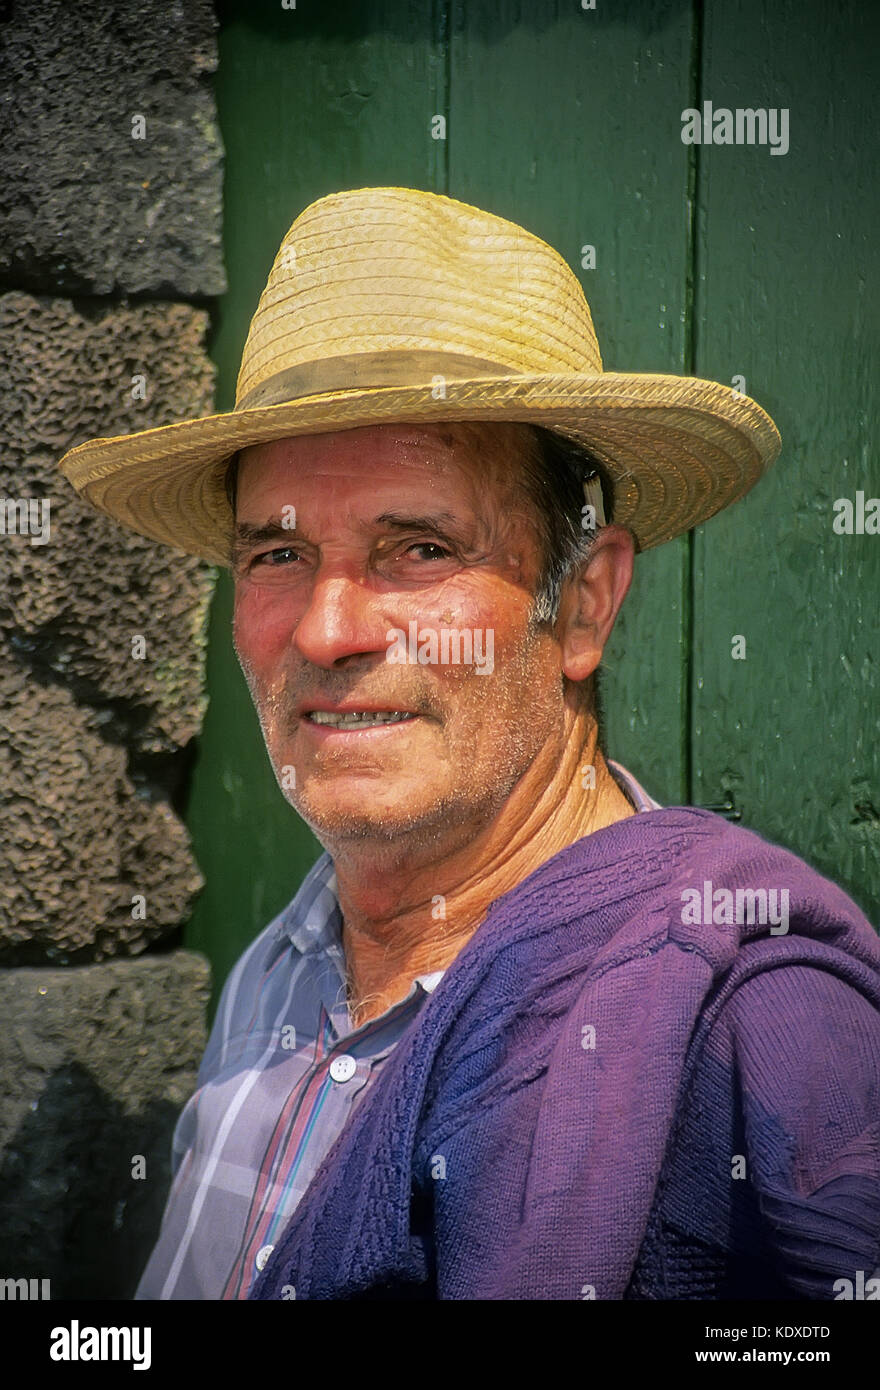 Portrait of an Azorian farmer wearing a traditional yellow, straw hat. His cigarette is hand-rolled using a corn husk. Pico Island, Azores. Stock Photo